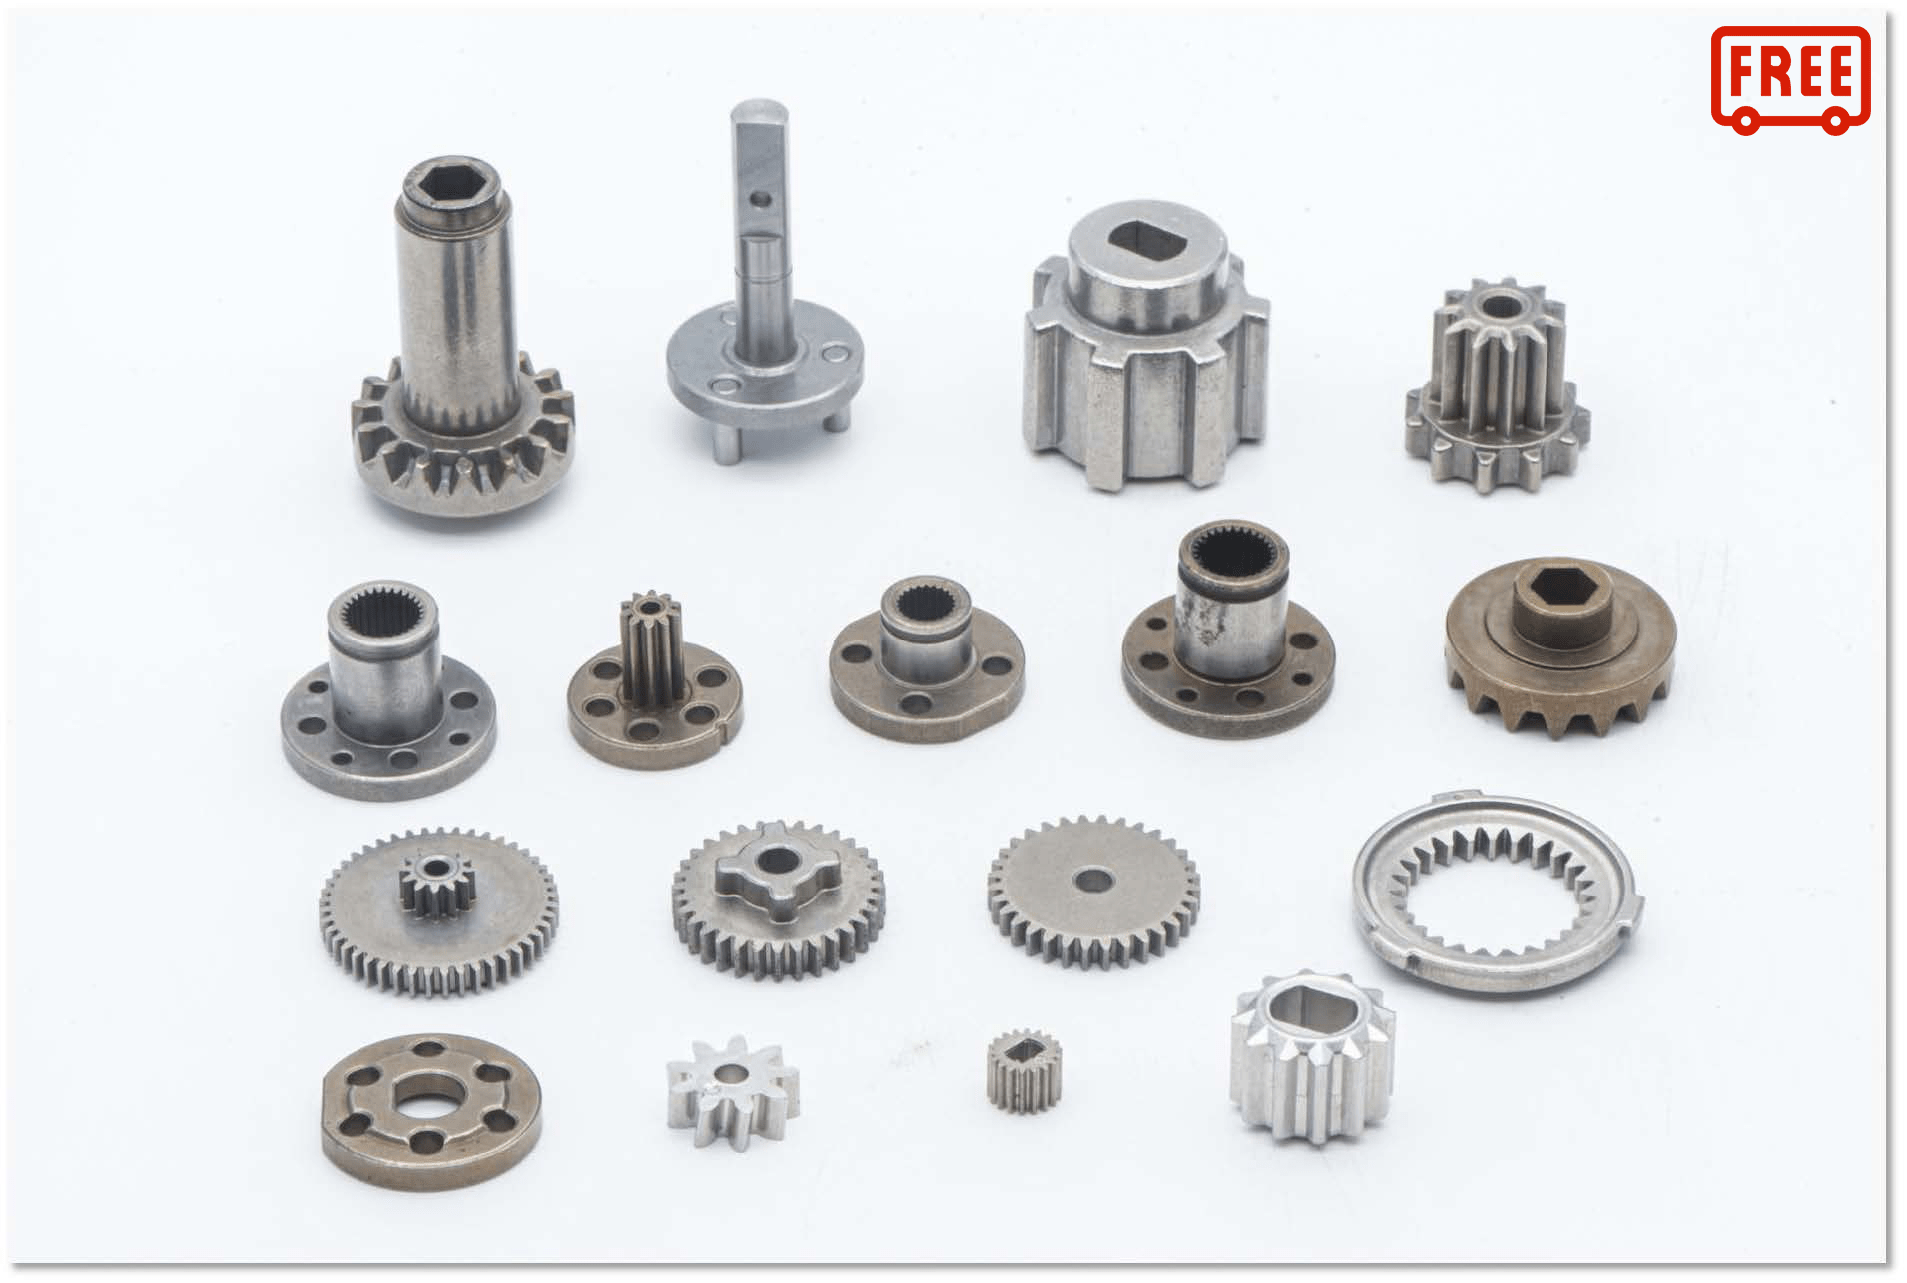 Free Sample-Gear Processing-Precision engineering company